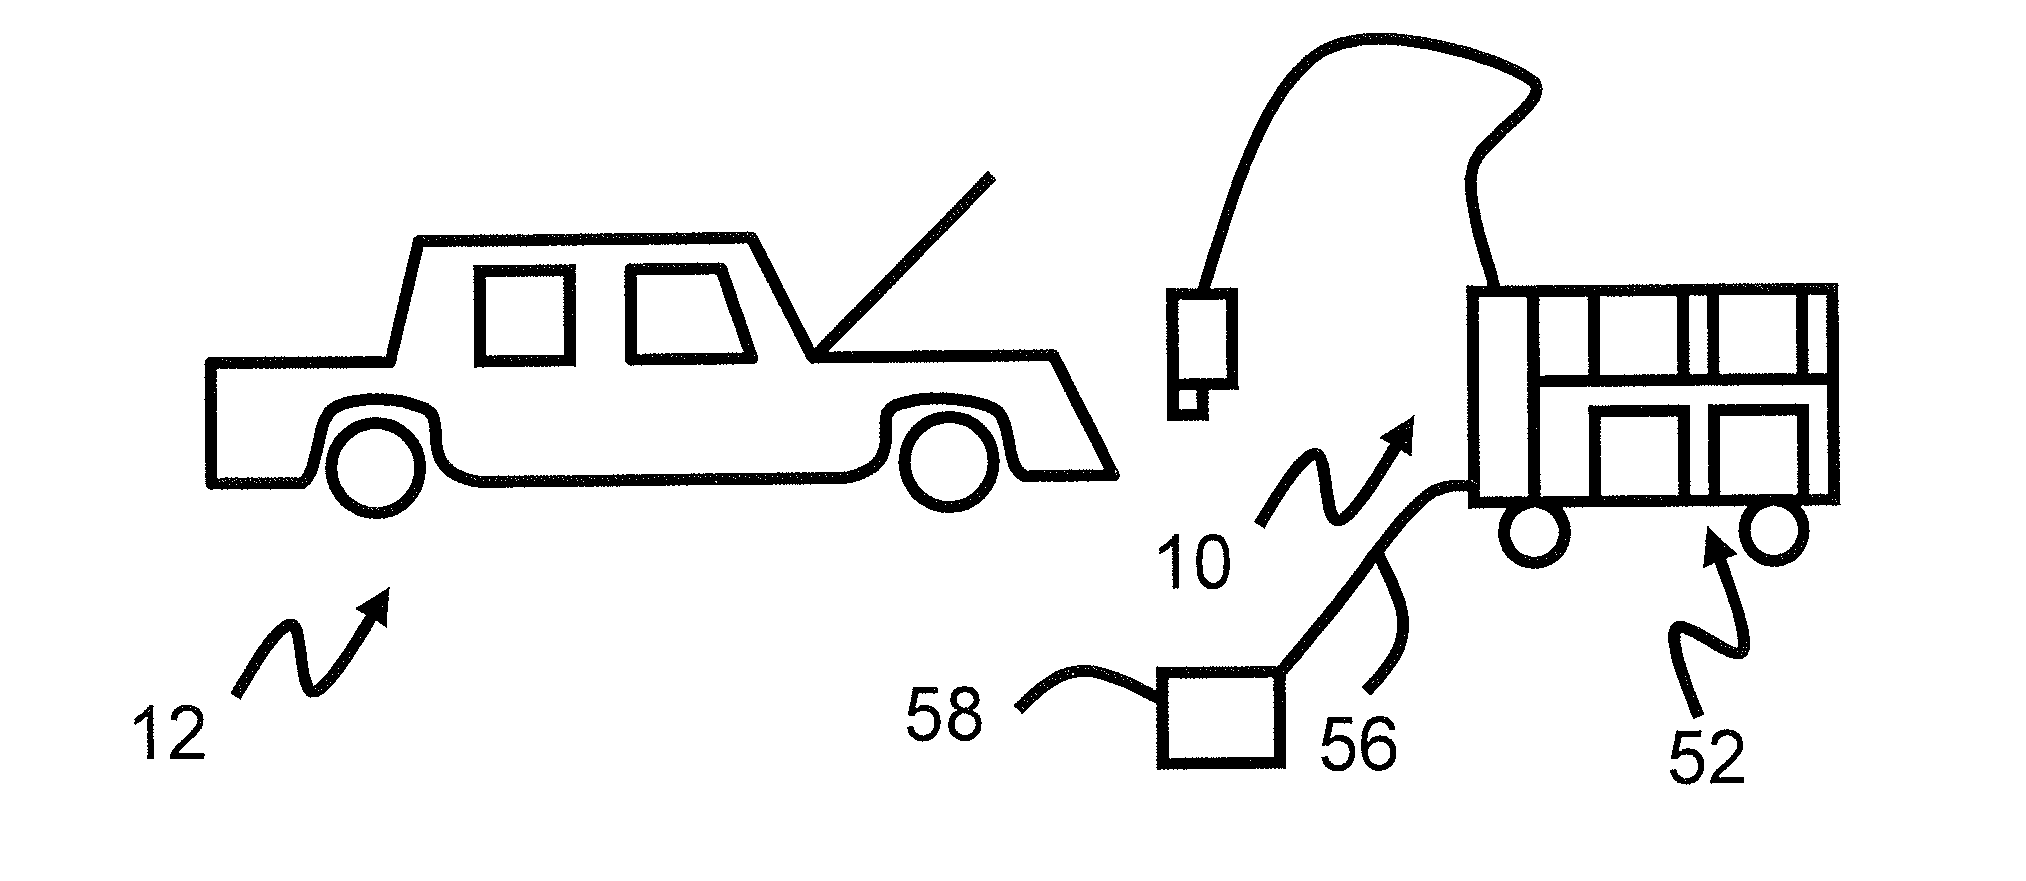 Vehicle Fluid Dispensing Apparatus and Method of Use